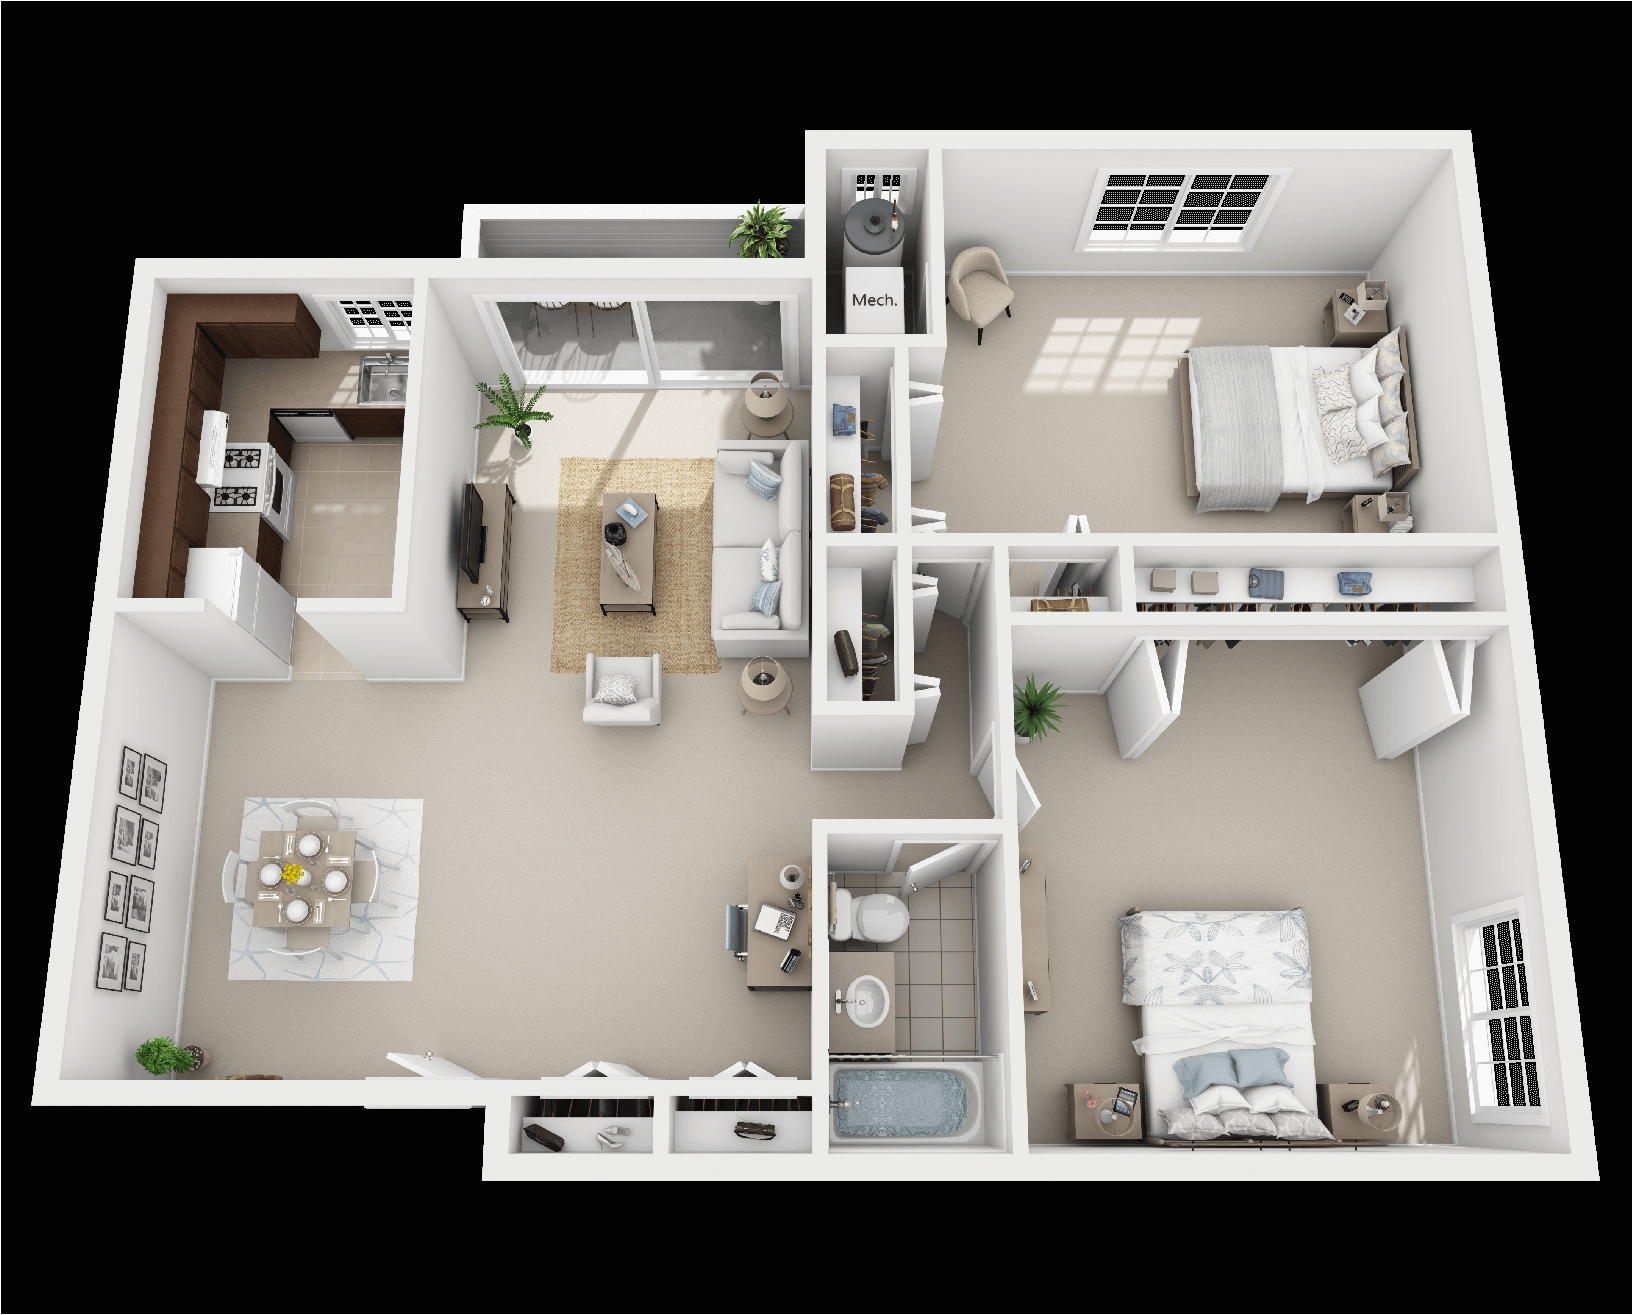 2 bedroom layout a